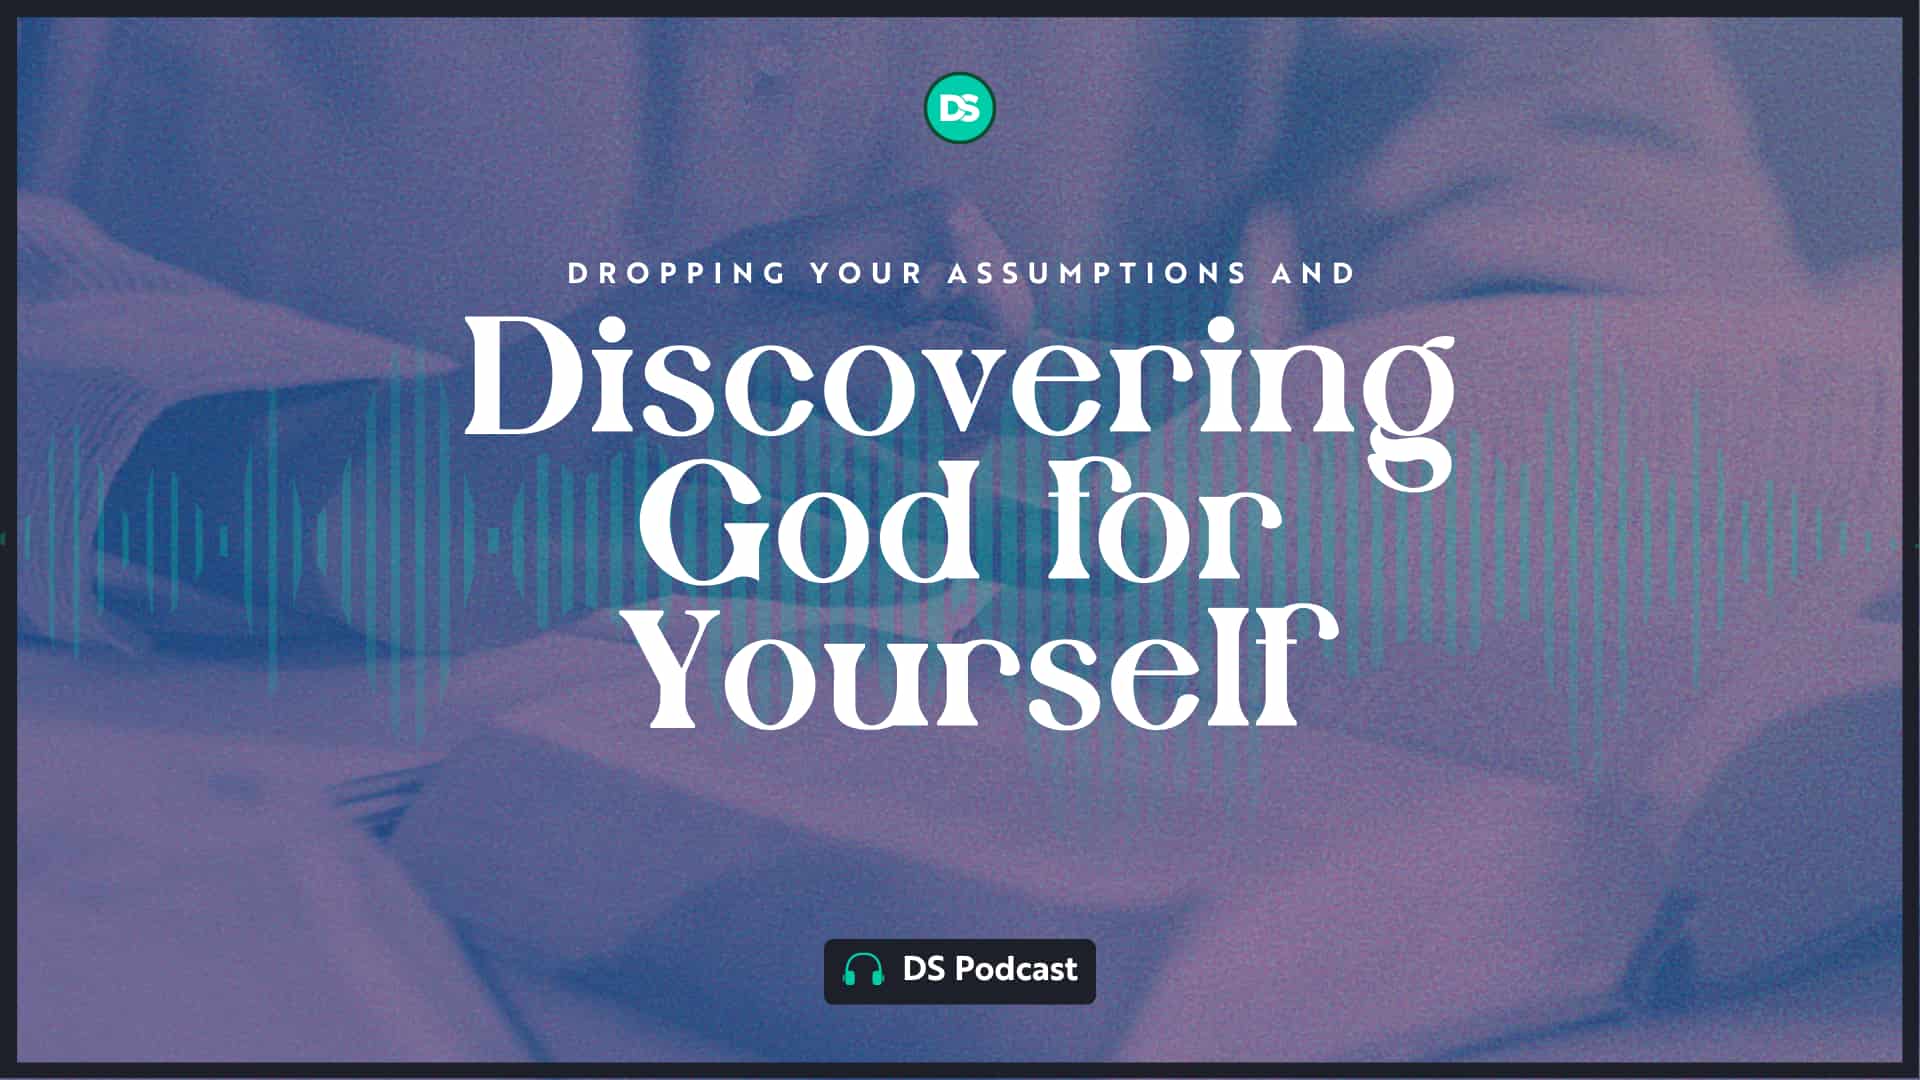 Dropping Your Assumptions and Discovering God for Yourself 2